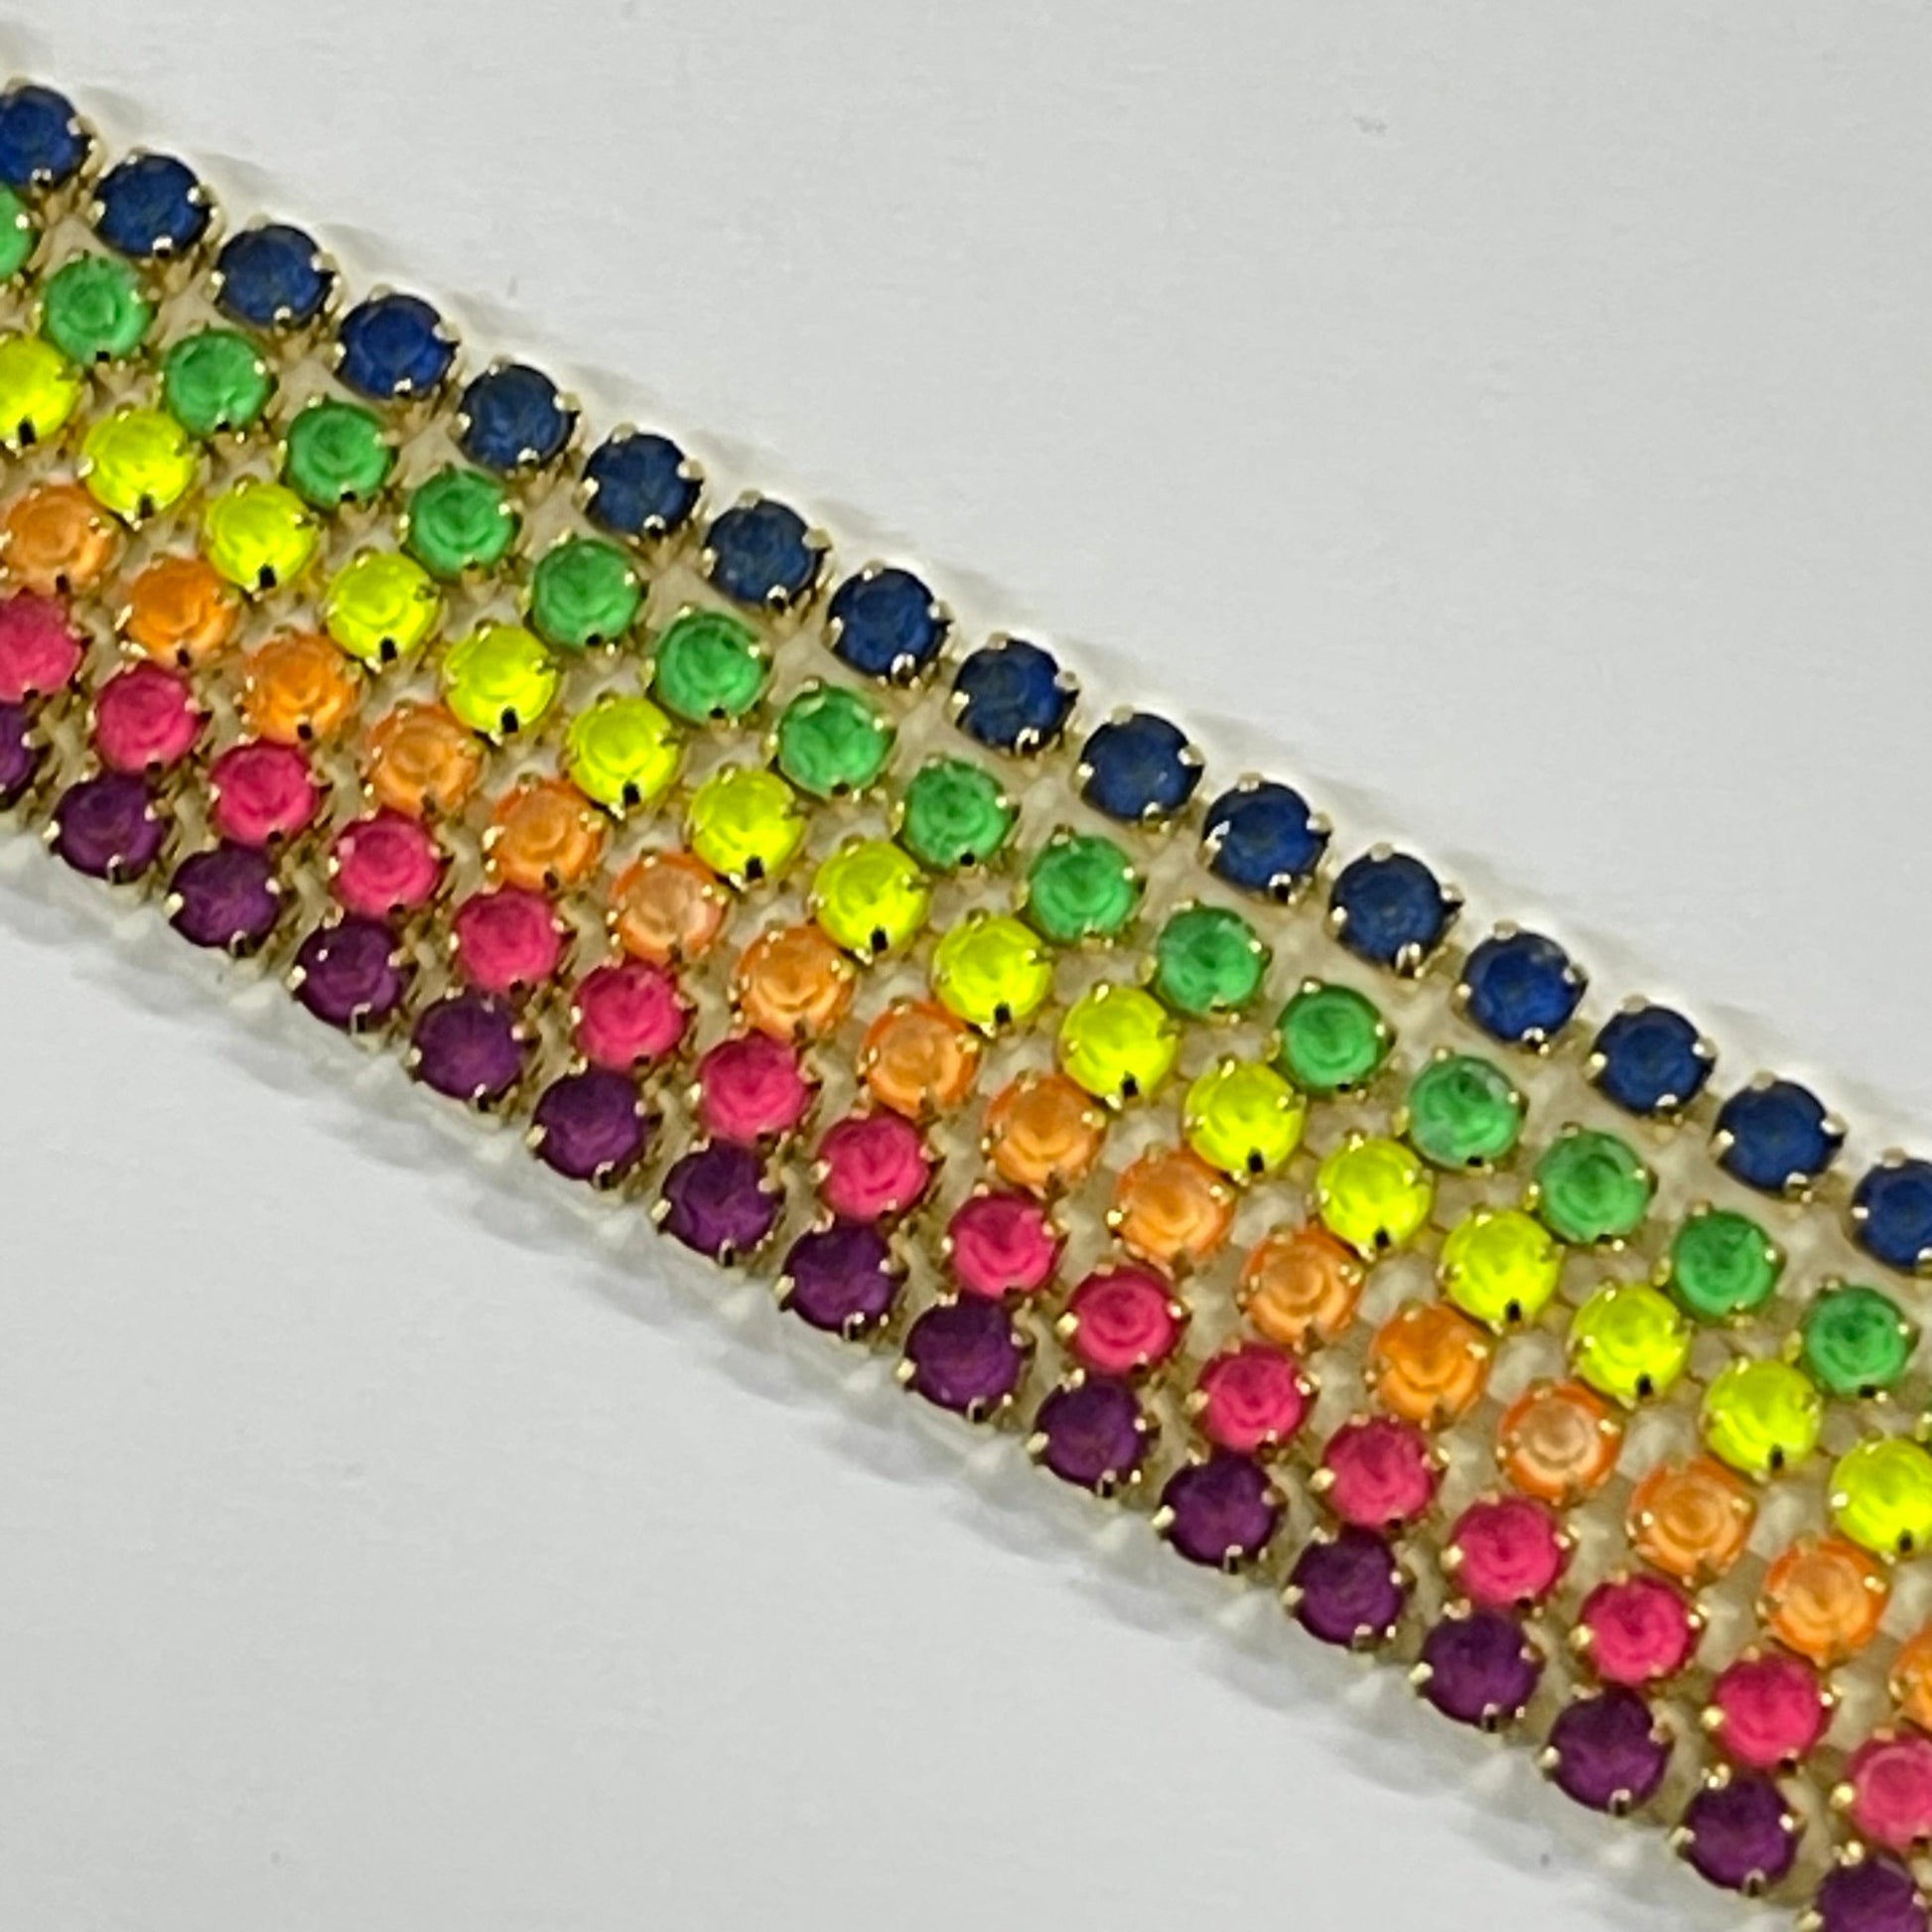 Opal Neon Rainbow  6 x 1 yard Ss6 Mixed Coloured Metal Rhinestone Metal Set, Promotions Promotions